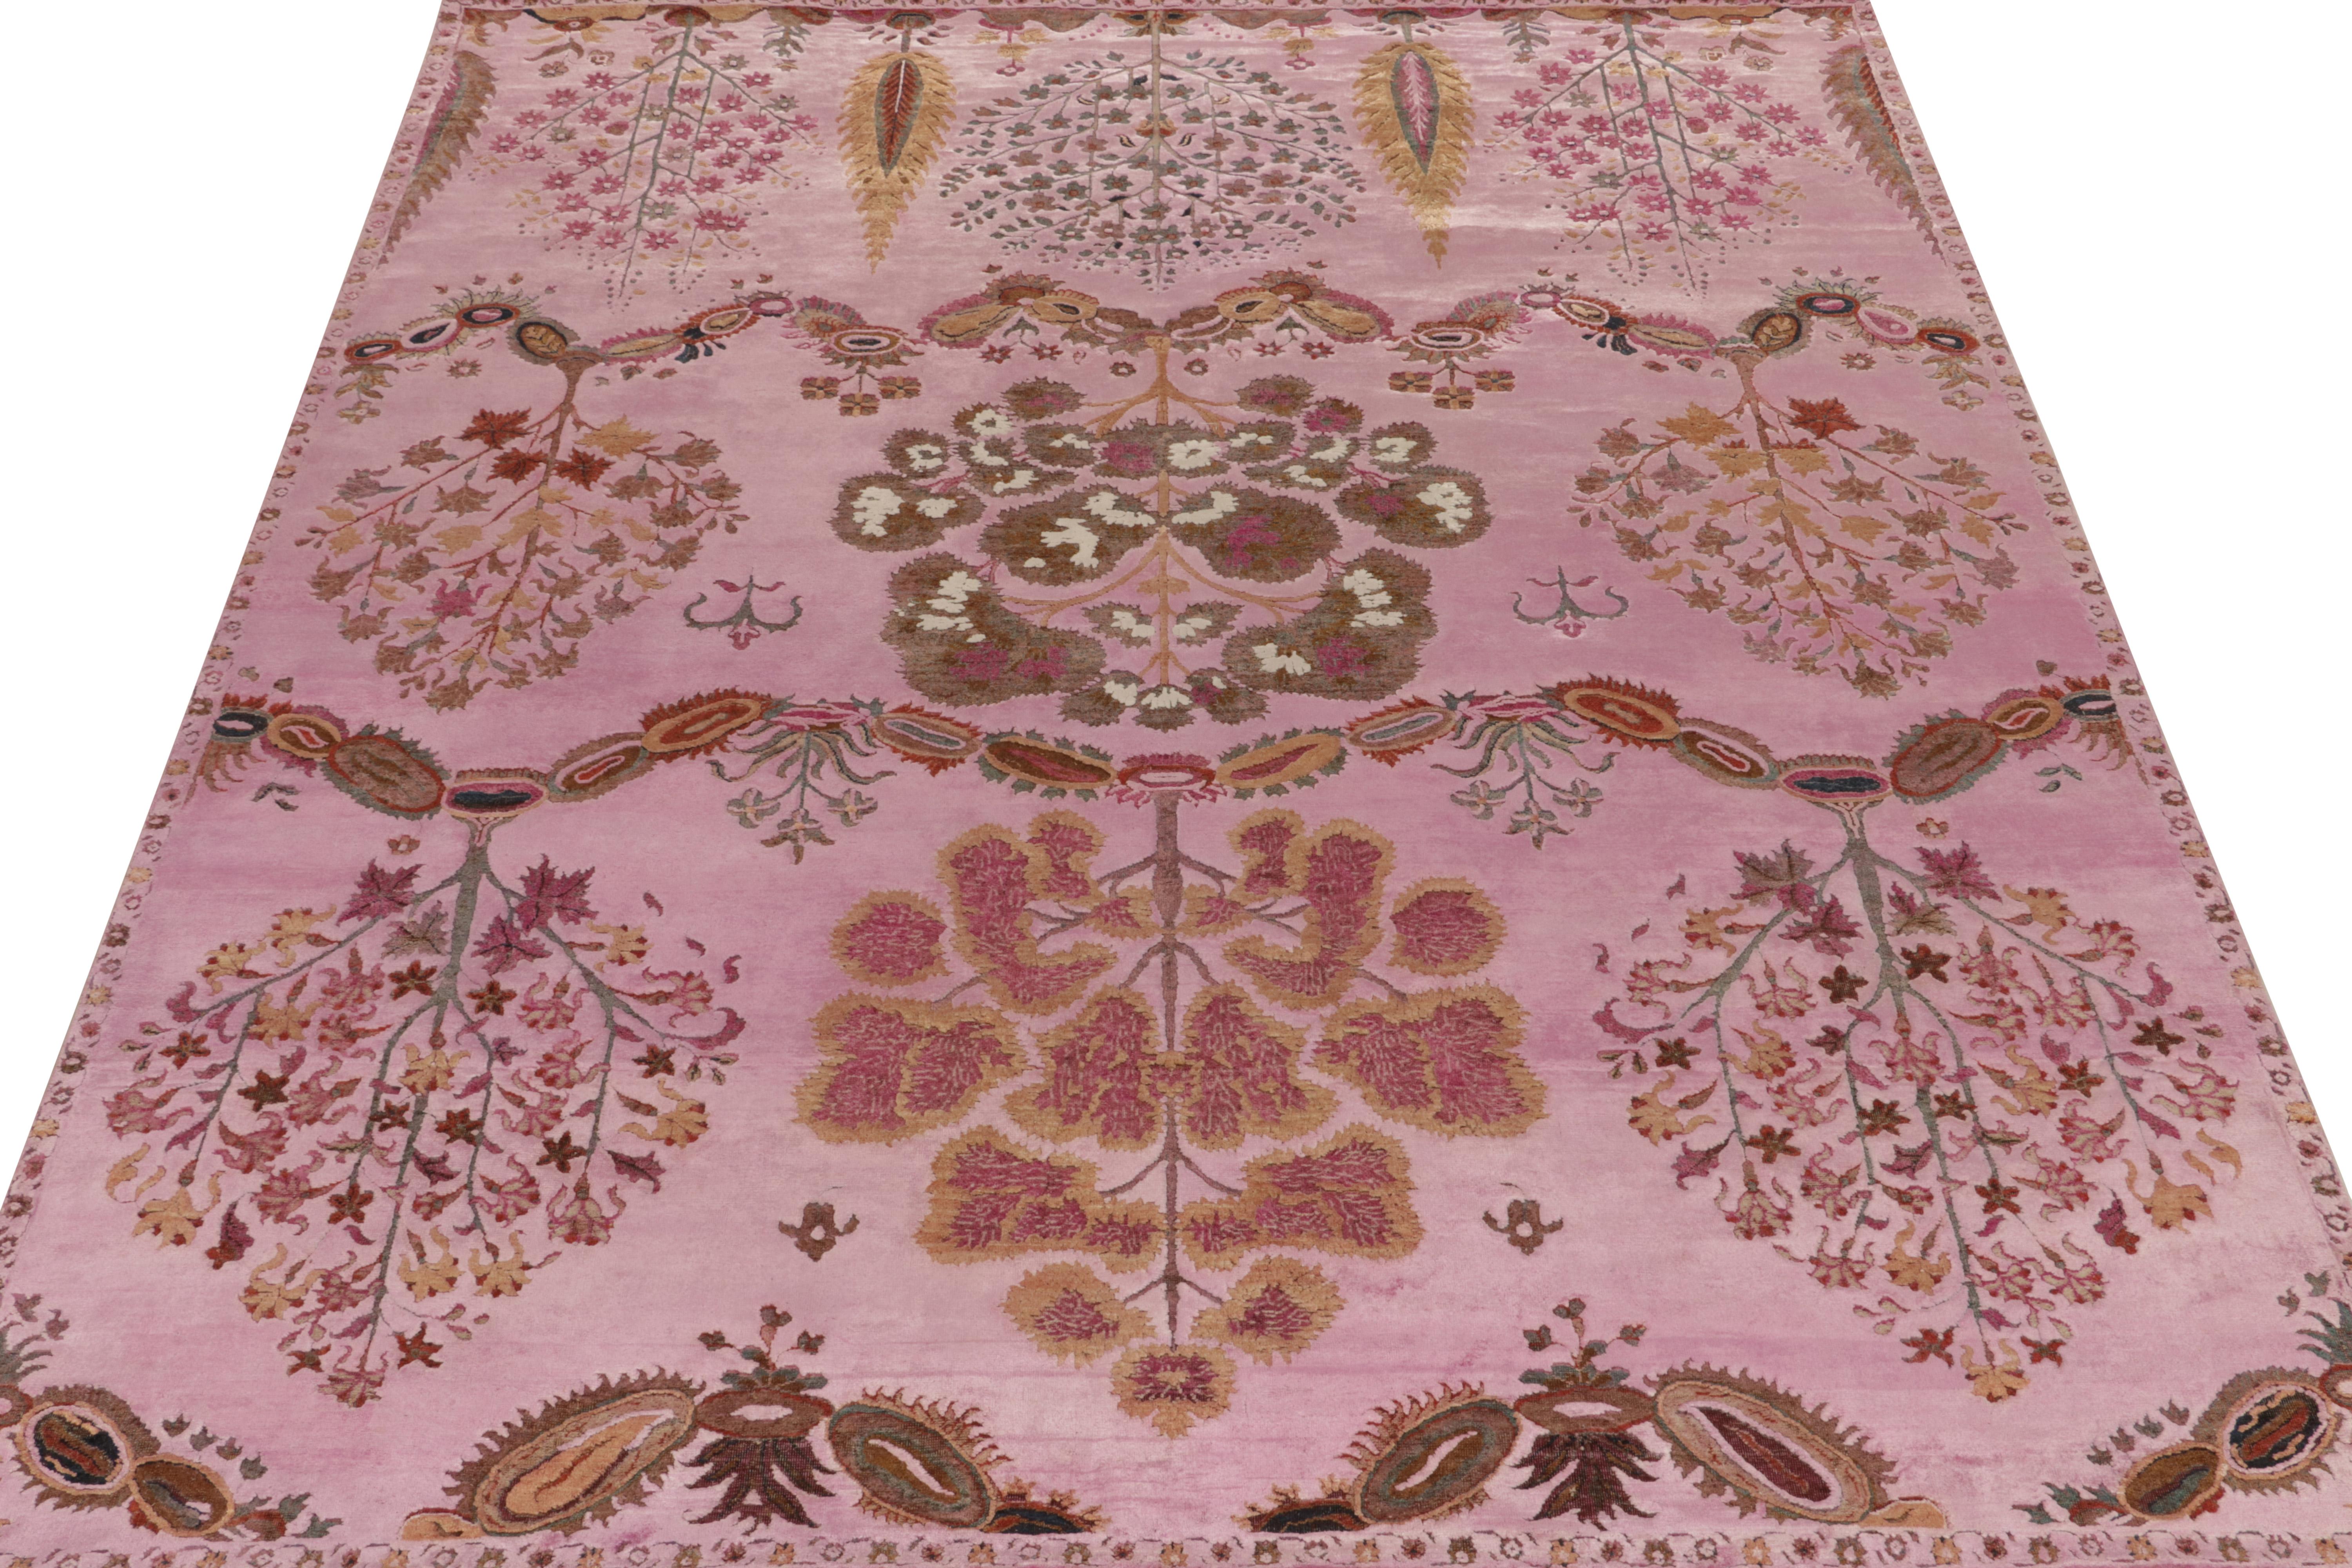 Hand-Knotted Rug & Kilim’s Classic Style Rug in Pink & Beige-Brown Floral Pattern For Sale